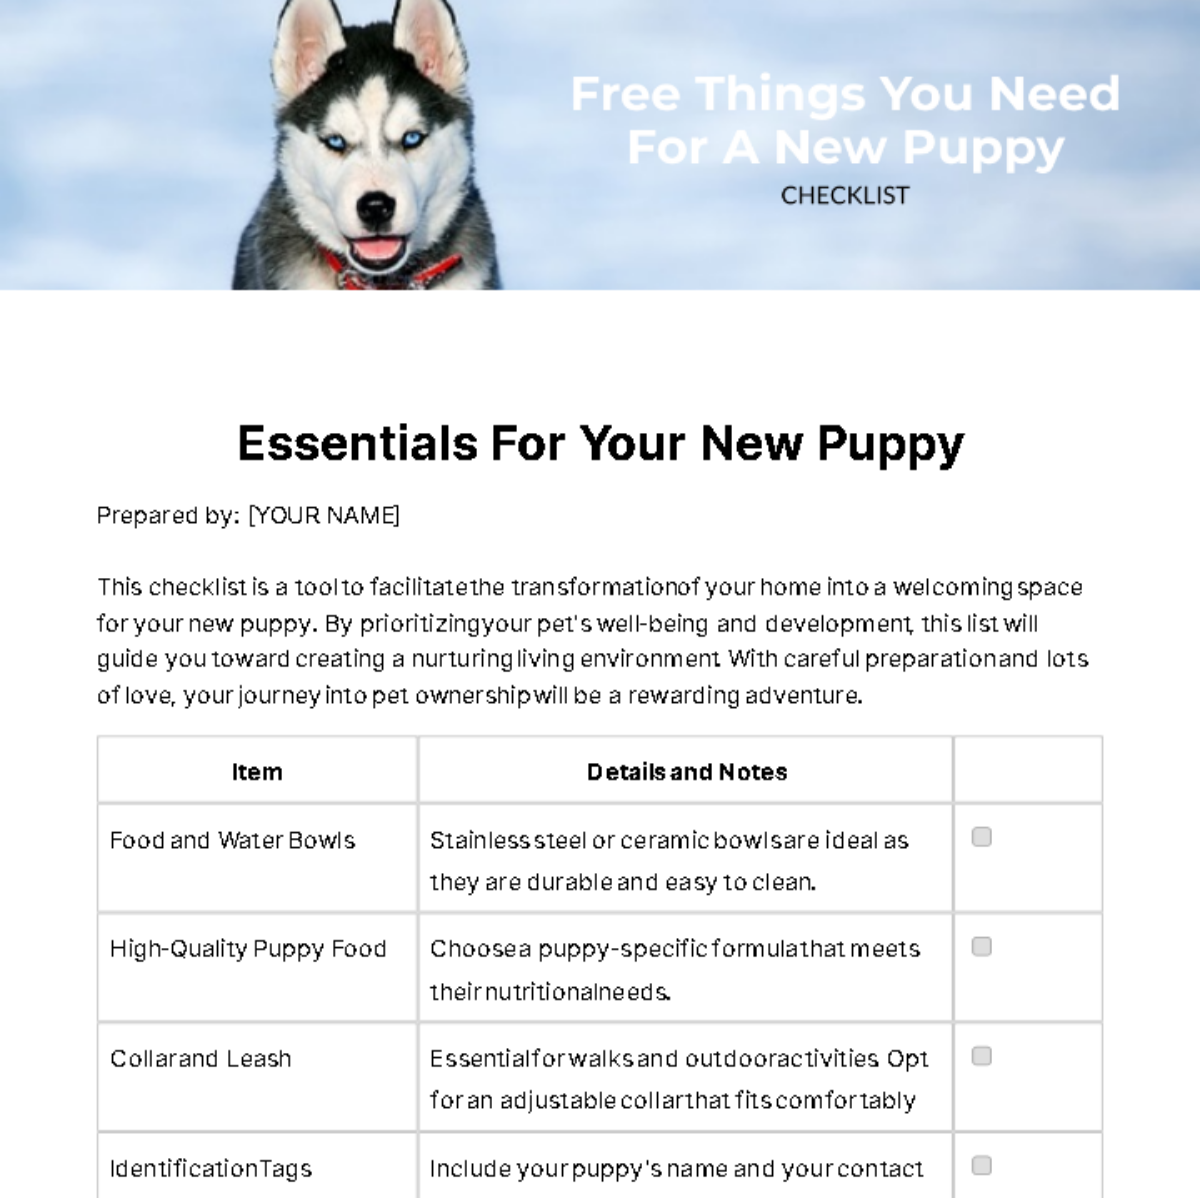 Things You Need For A New Puppy Checklist Template